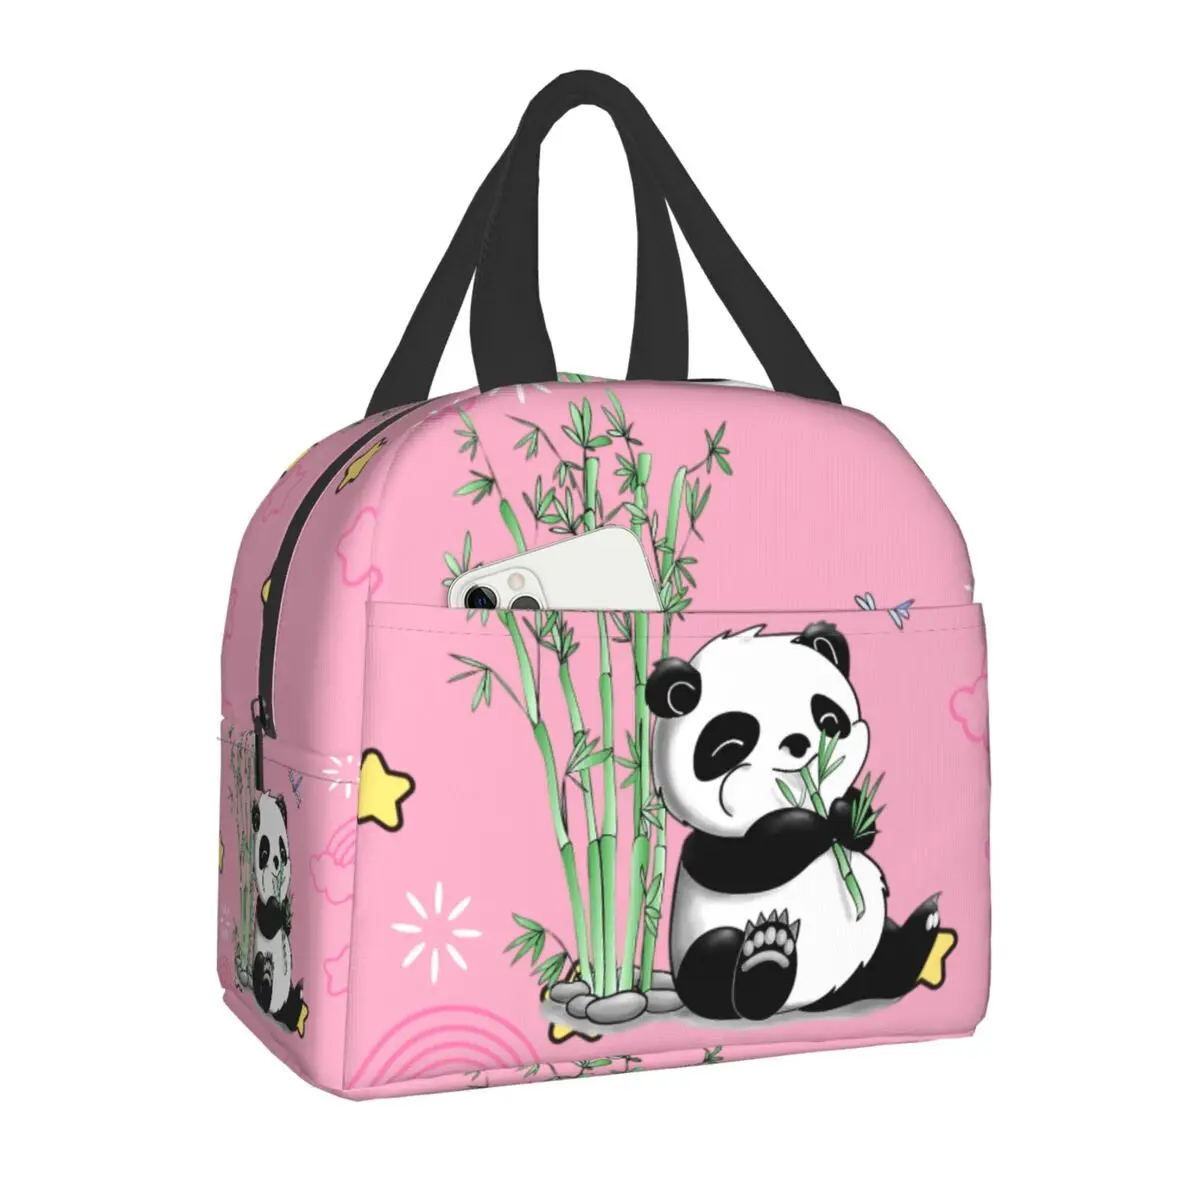 Panda Bear Insulated Lunch Bag for Outdoor Picnic Portable Cooler Thermal Lunch Box Women Kids School Work Food Storage Bags